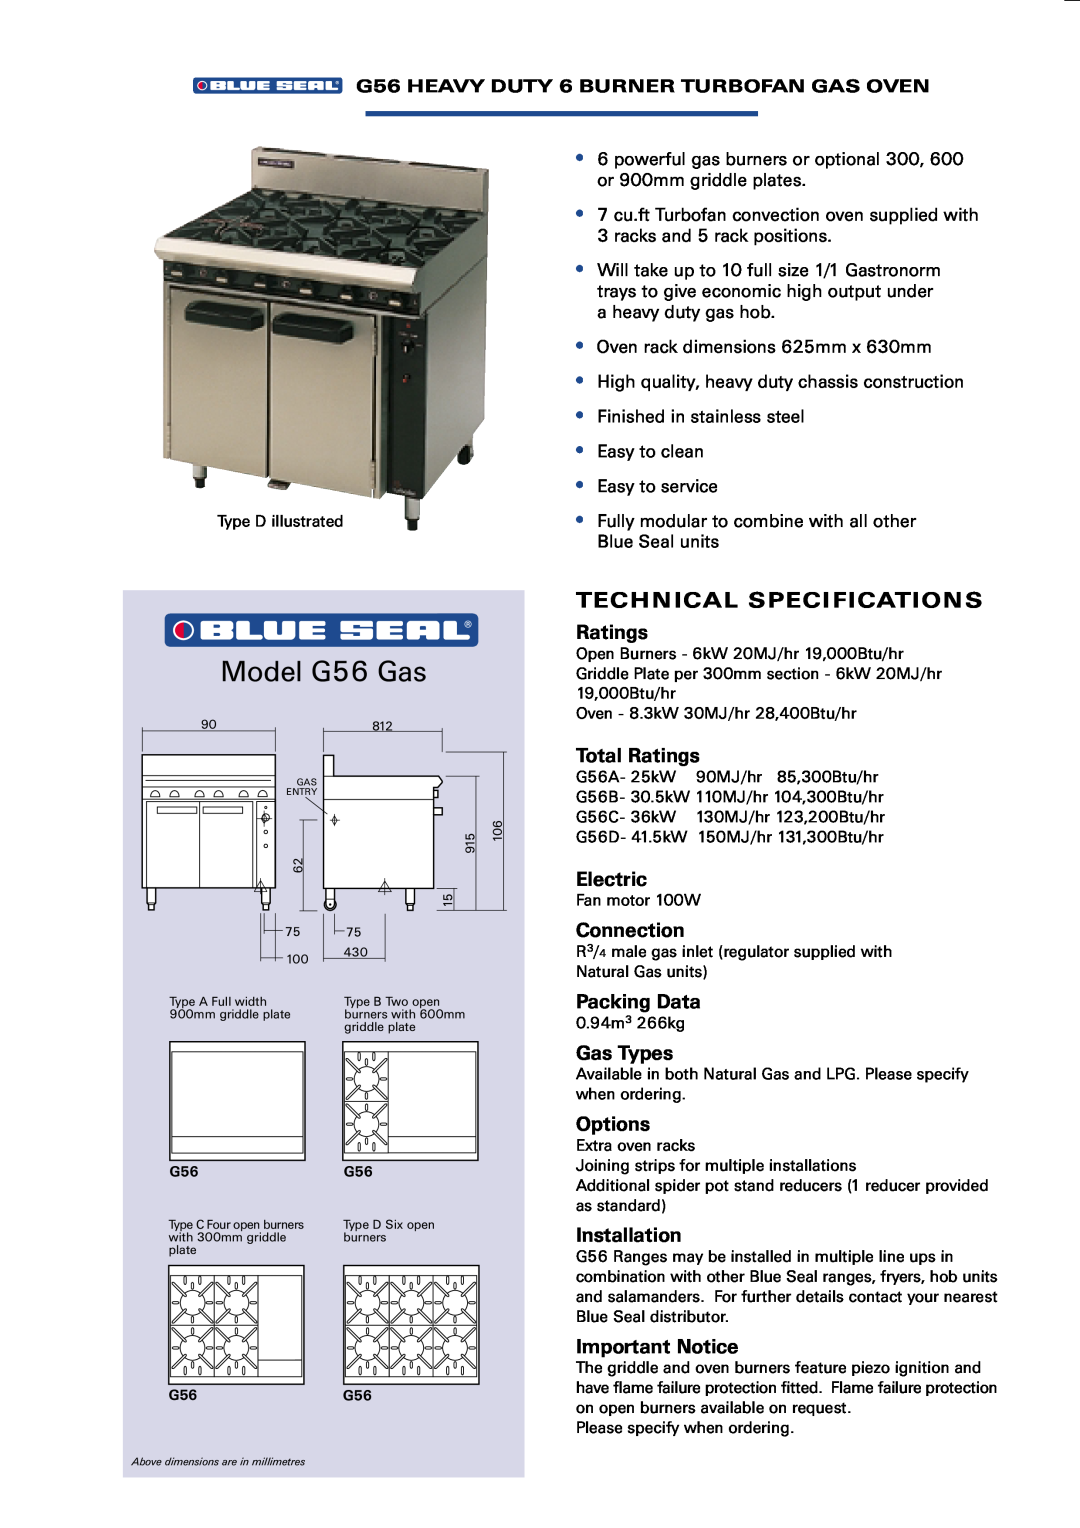 Moffat E56 Model G56 Gas, Total Ratings, Electric, Connection, Gas Types, Important Notice, racks and 5 rack positions 